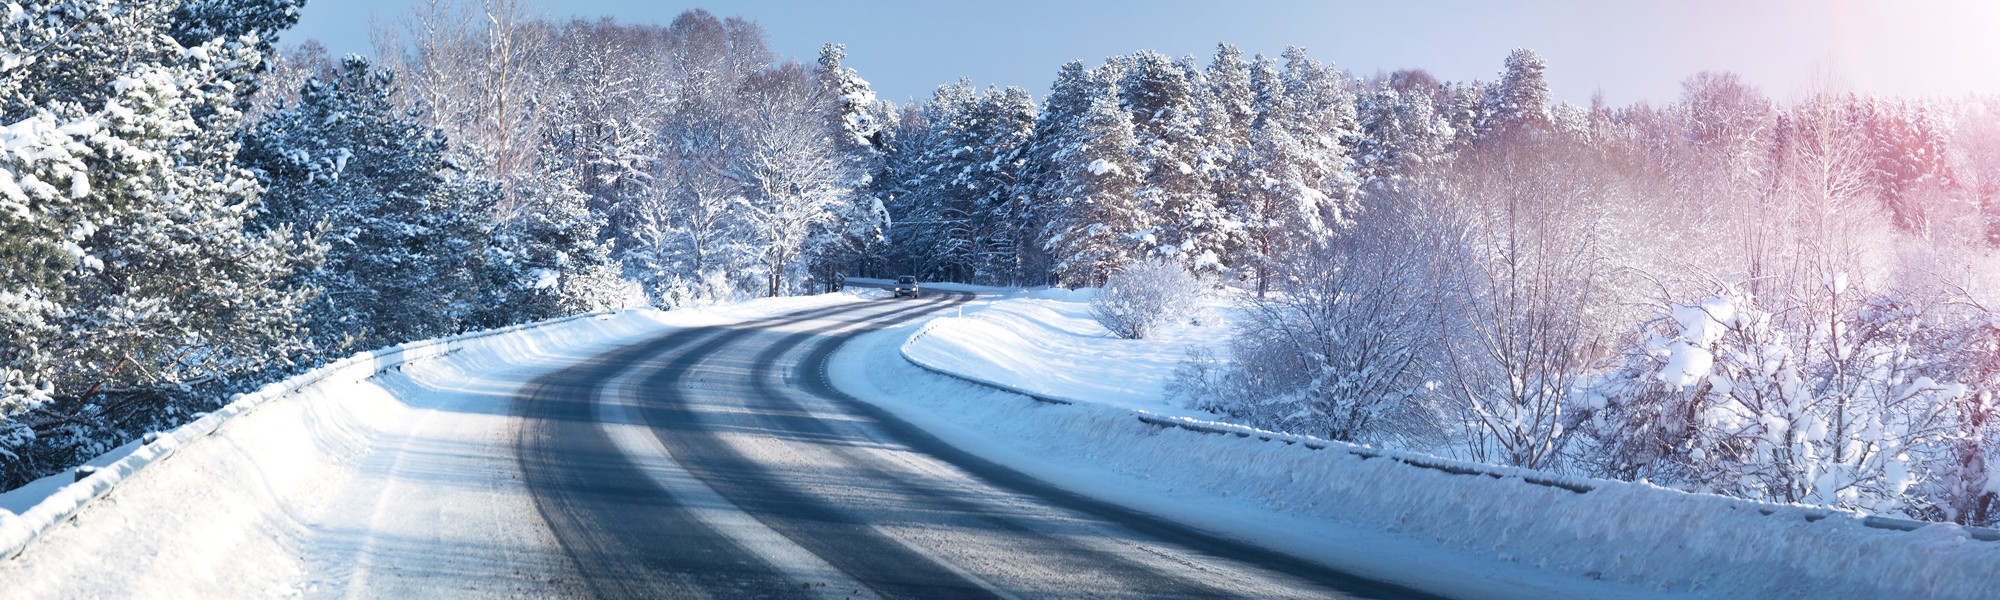 winter-road-page-banners-2000x600.